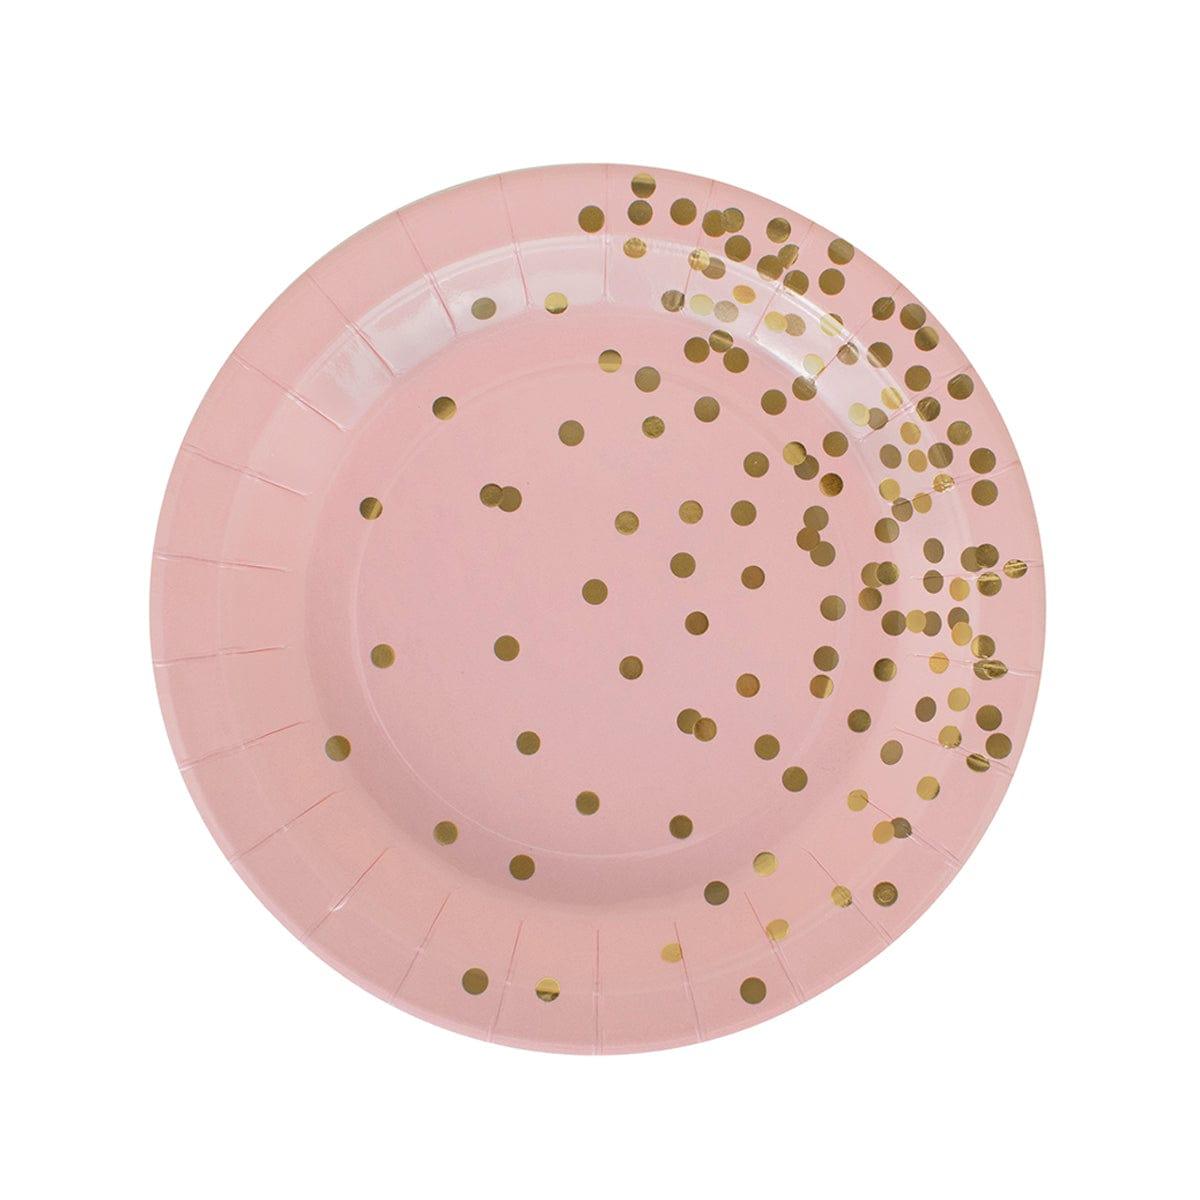 YIWU SANDY PAPER PRODUCTS CO., LTD Everyday Entertaining Light Pink Confetti Explosion Plates, 7 Inches, 8 Count